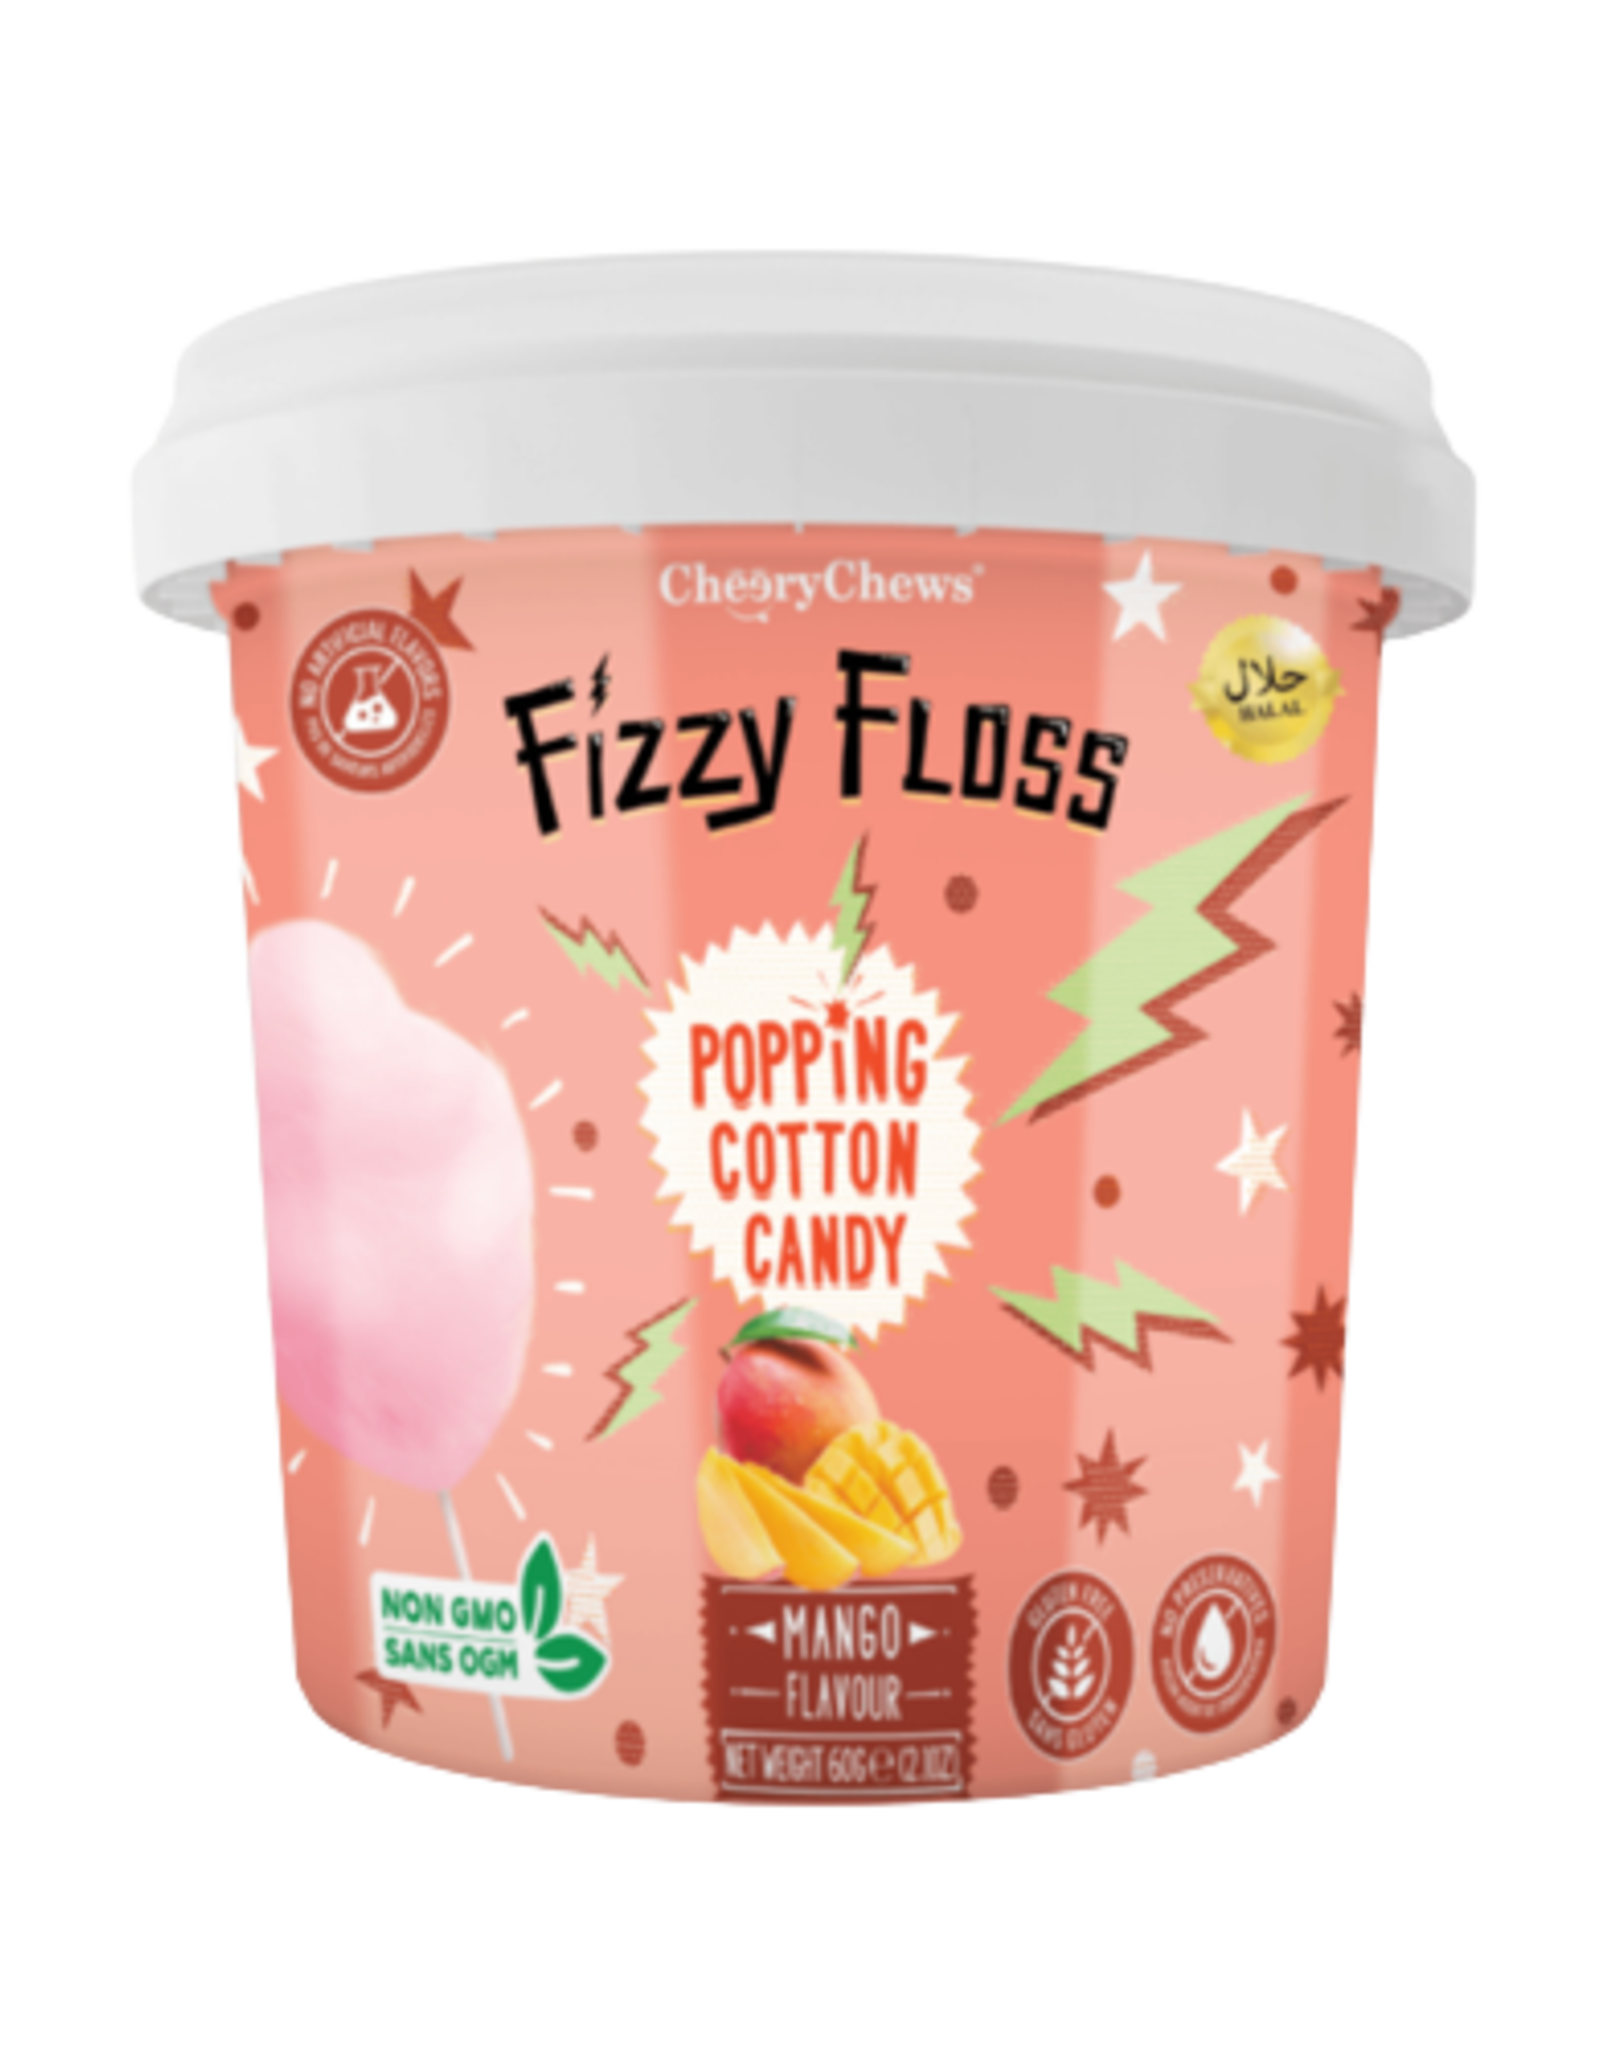 Fizzy Floss Popping Cotton Candy Mango